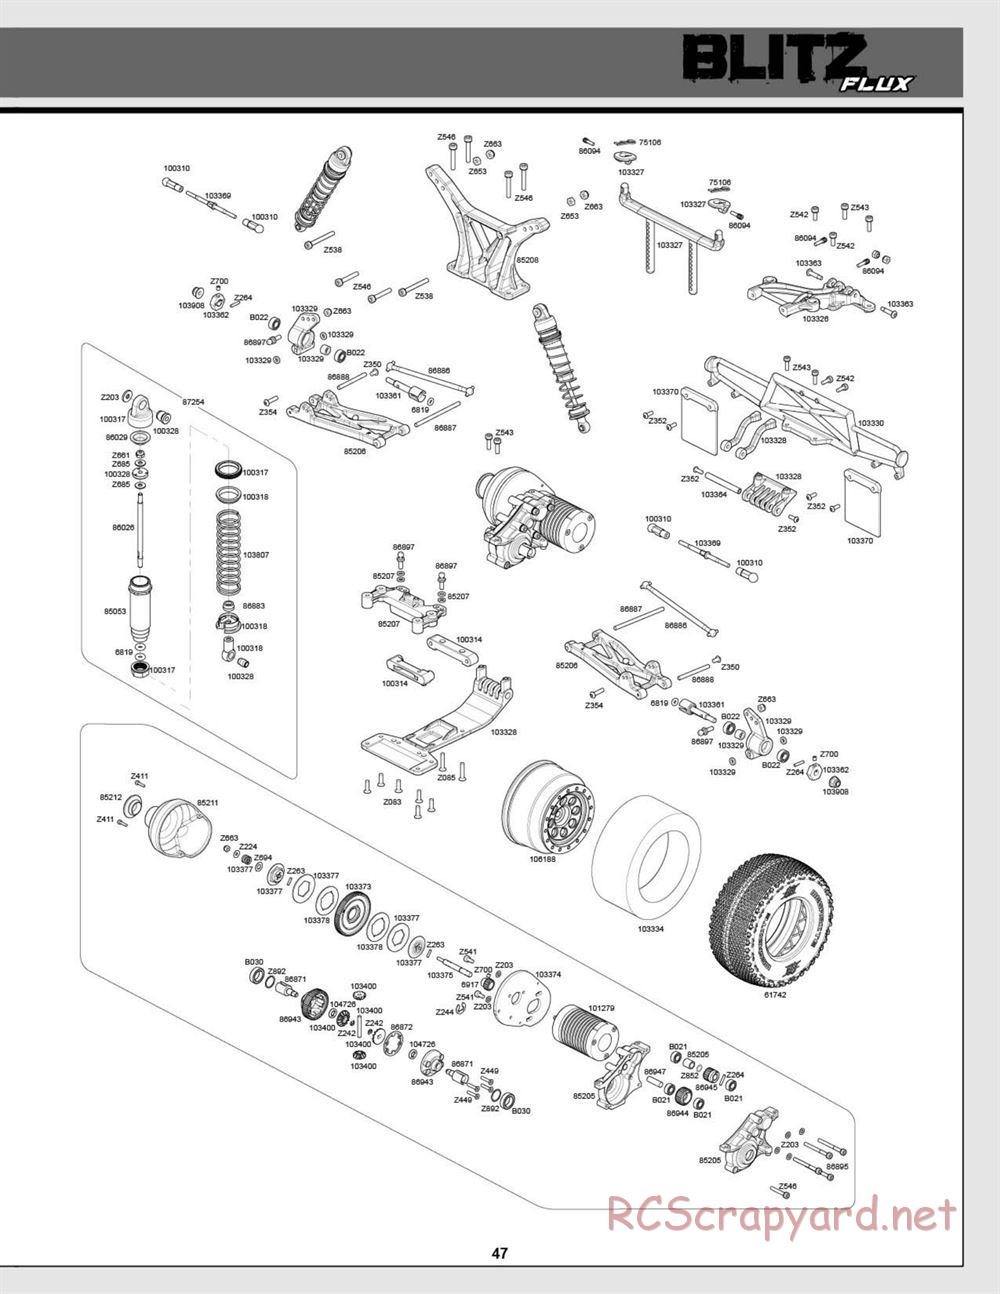 HPI - Blitz Flux - Exploded View - Page 47